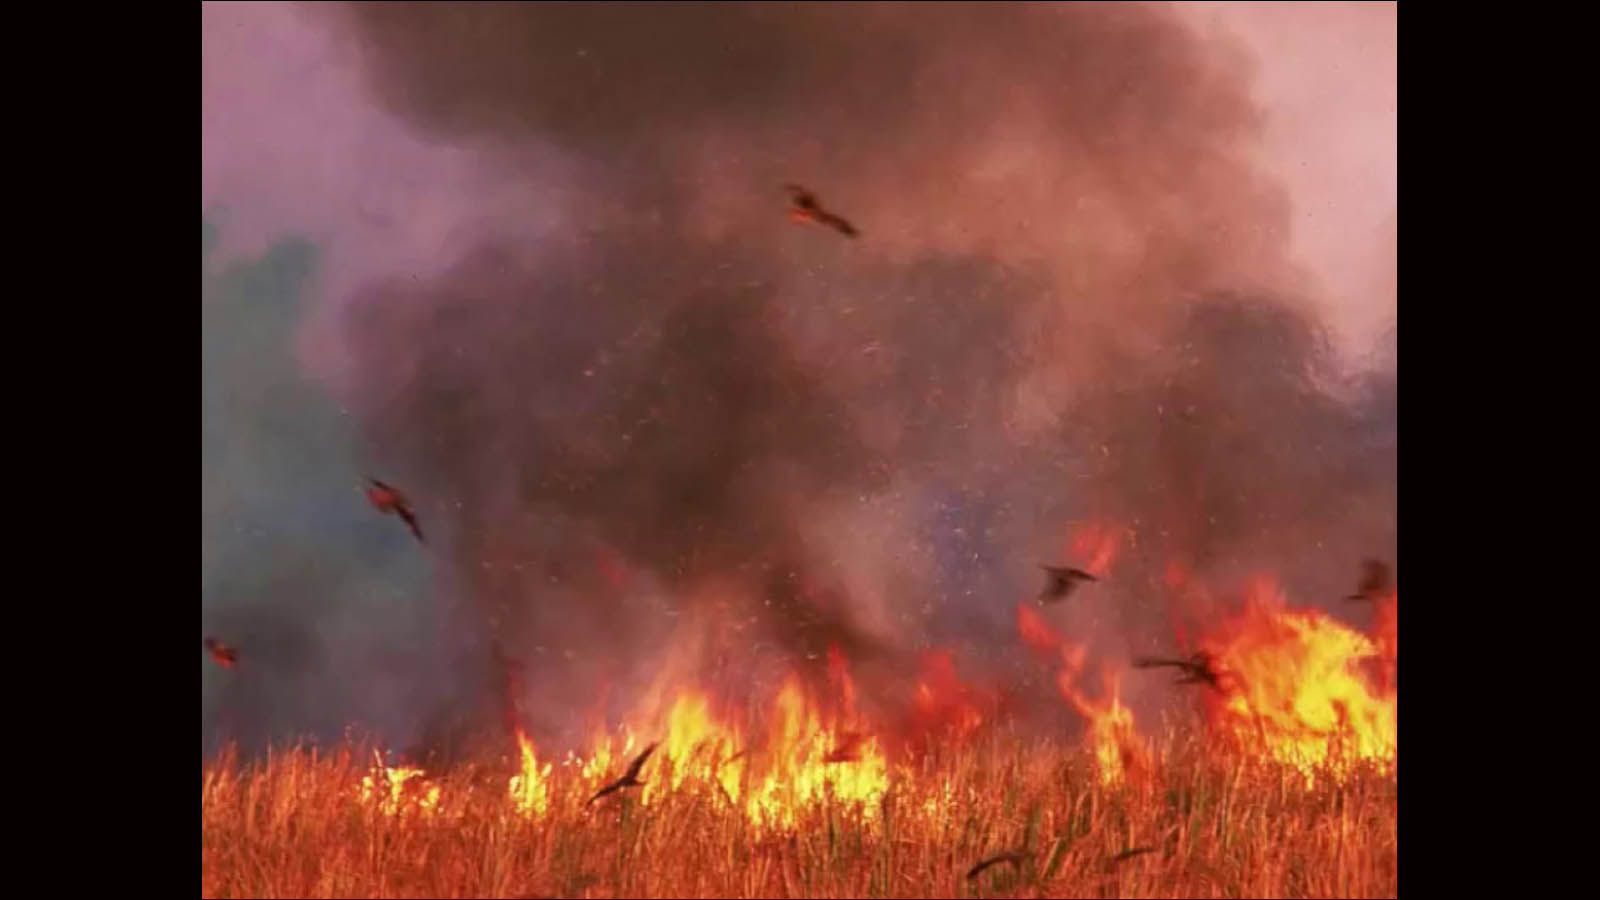 Severe Wildfires in Wyoming Last Year Killed Massive Numbers of Birds